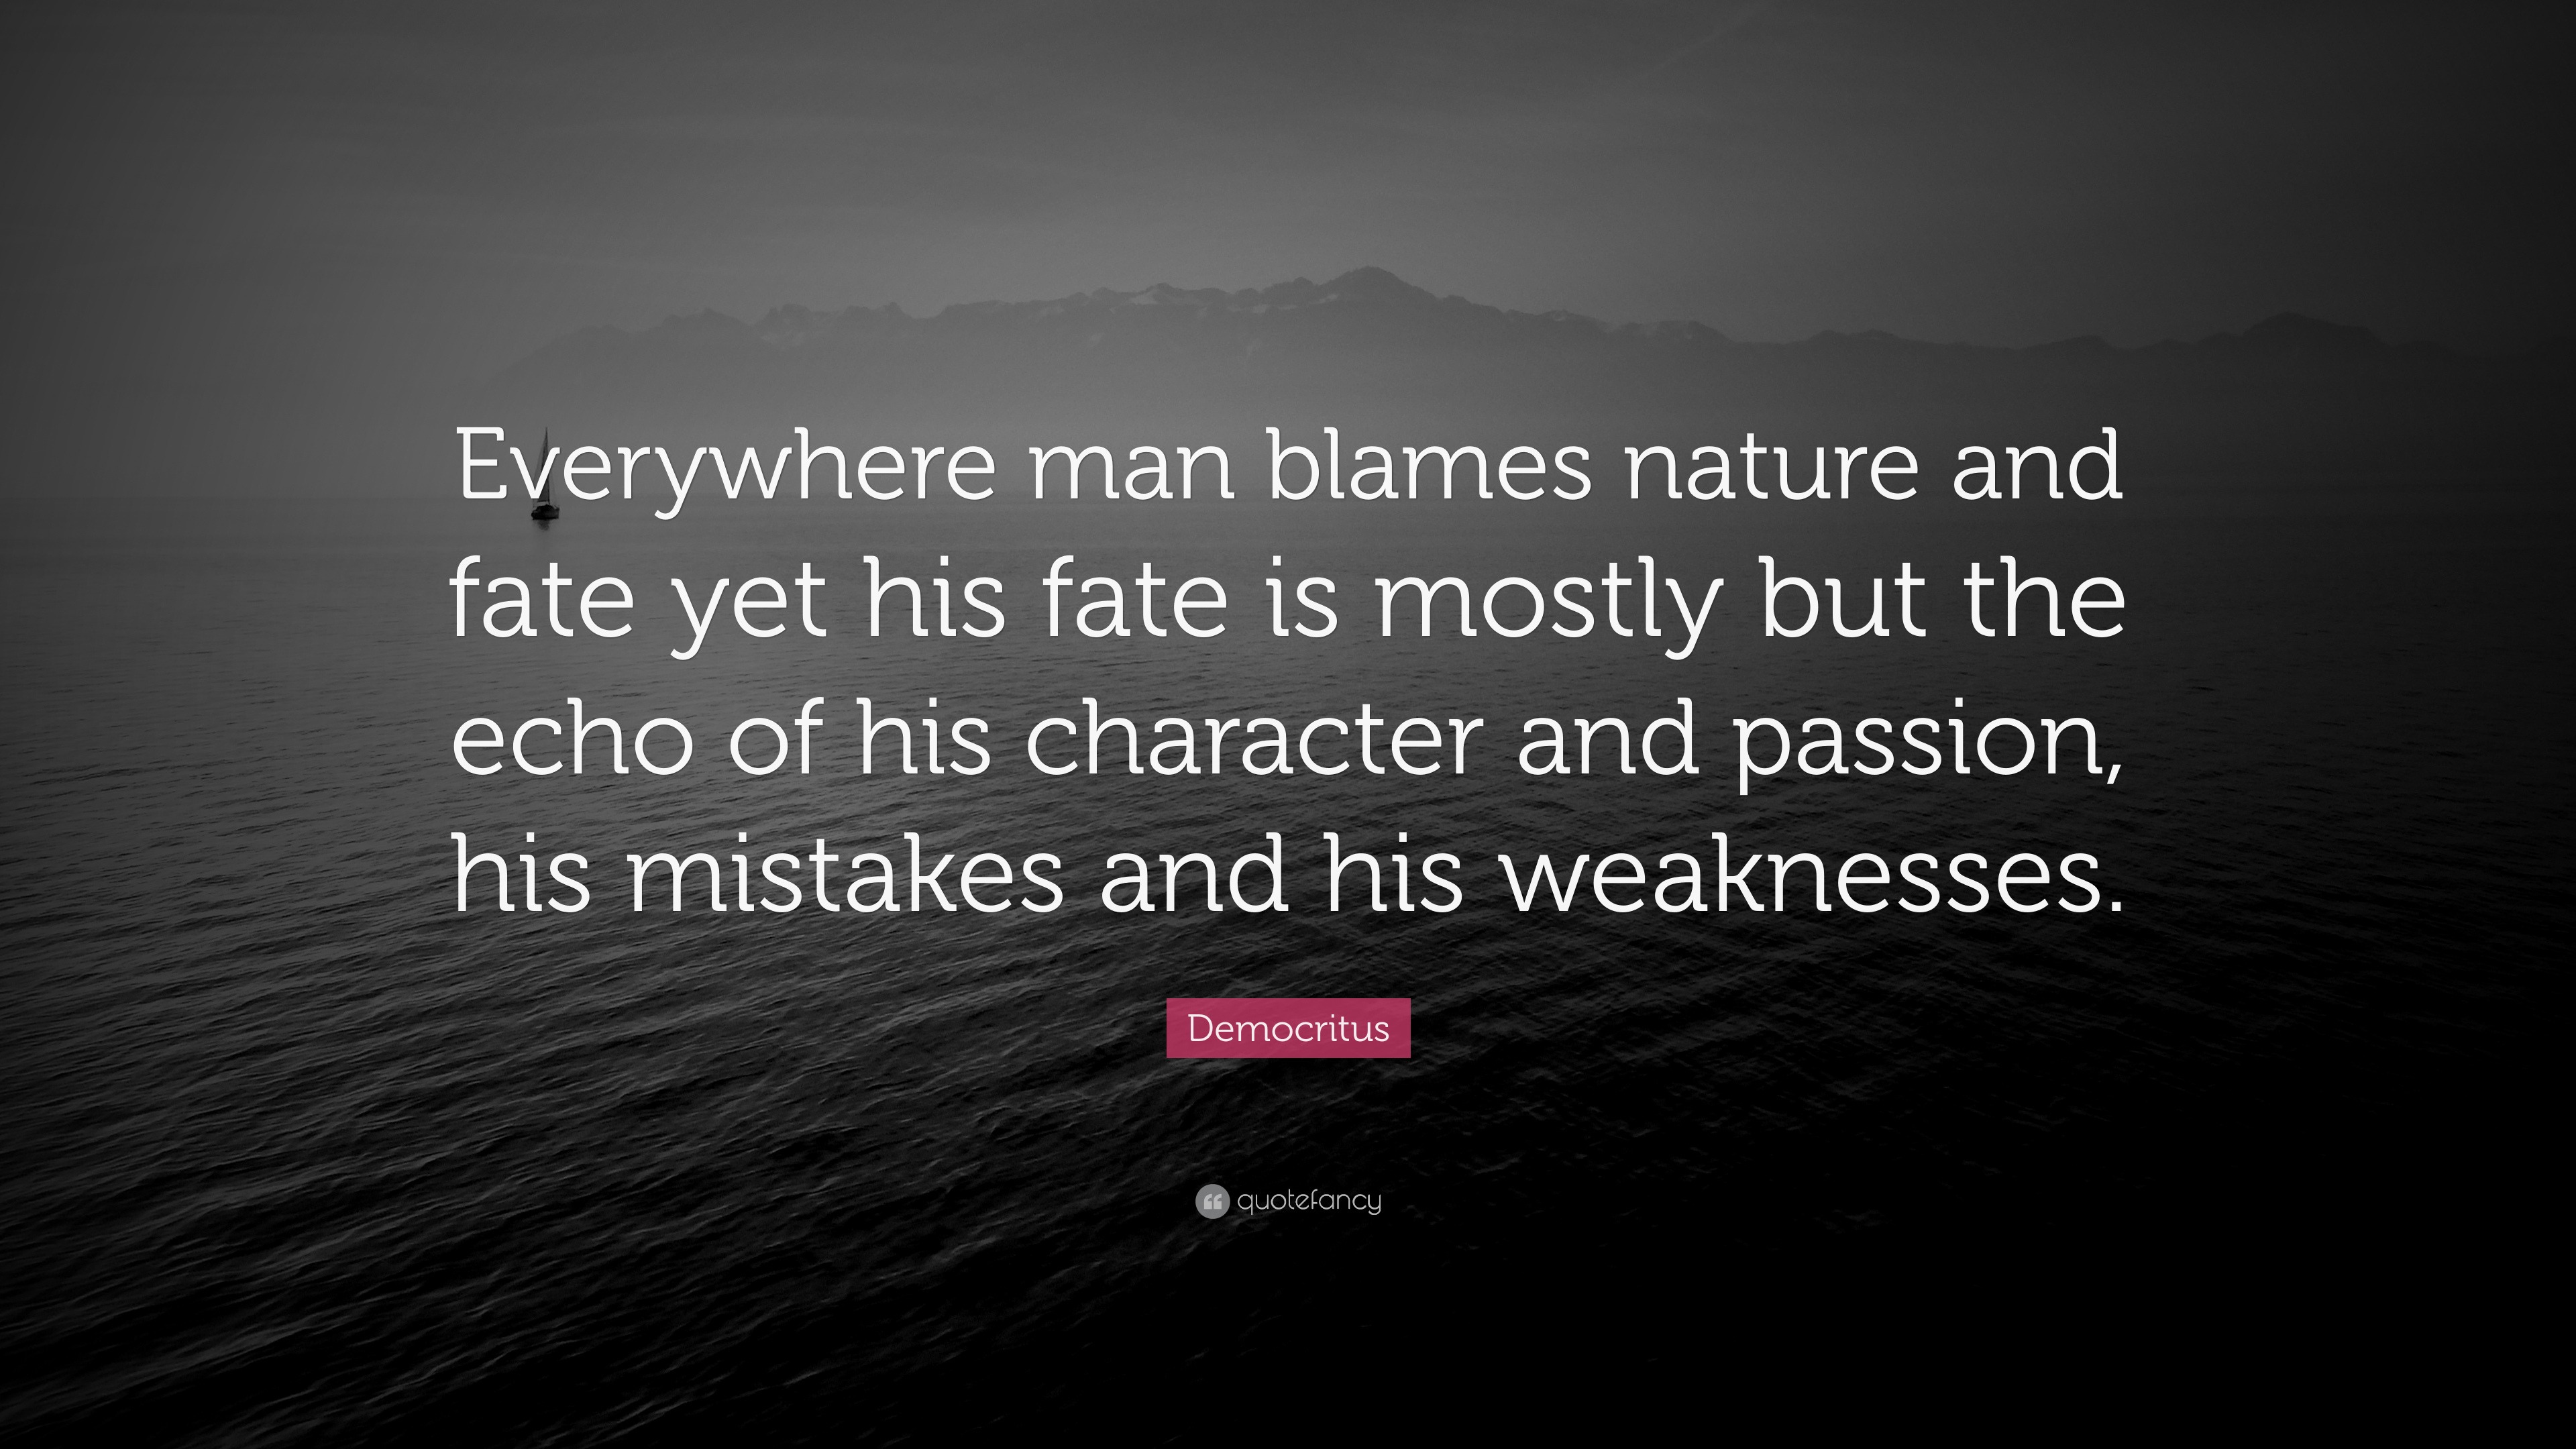 Top 37 Quotes About The Mistakes Of Youth: Famous Quotes & Sayings About  The Mistakes Of Youth